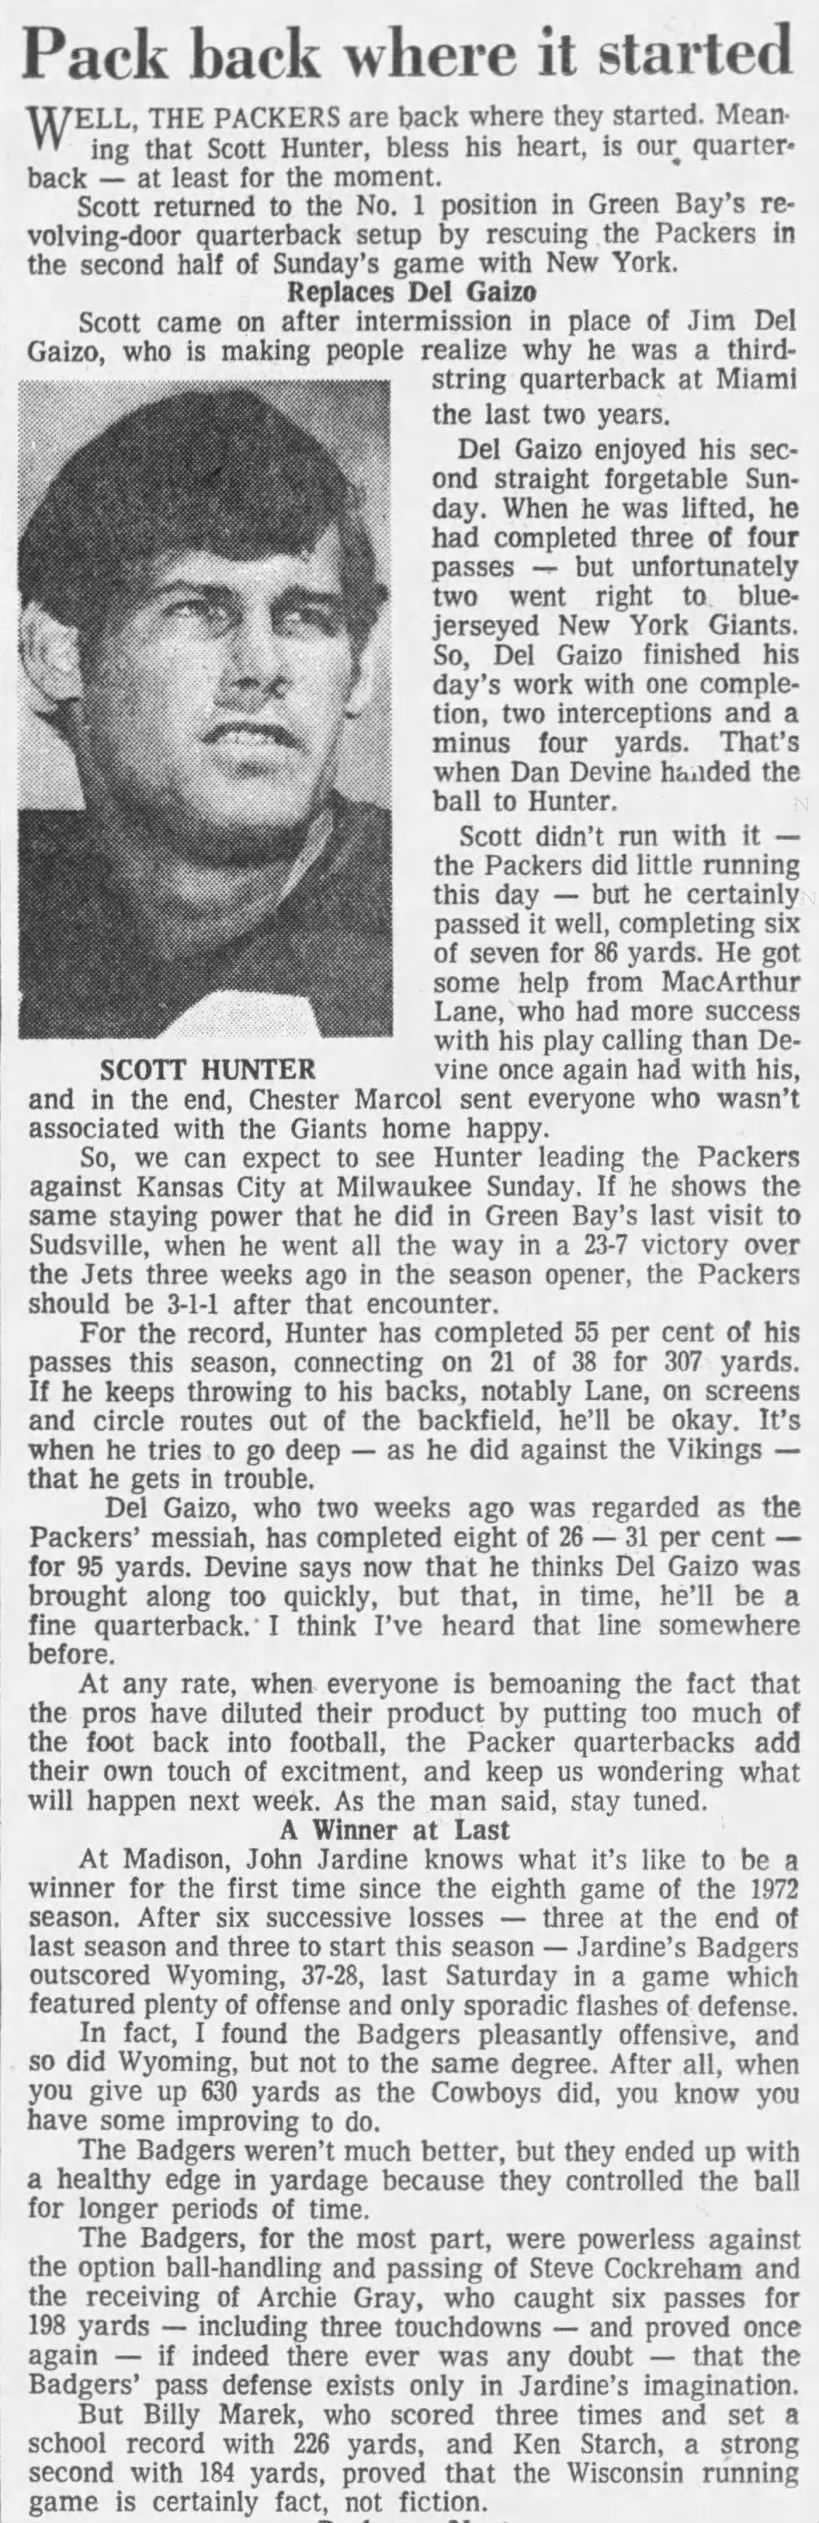 An article about the Packers quarterback competition in 1973.